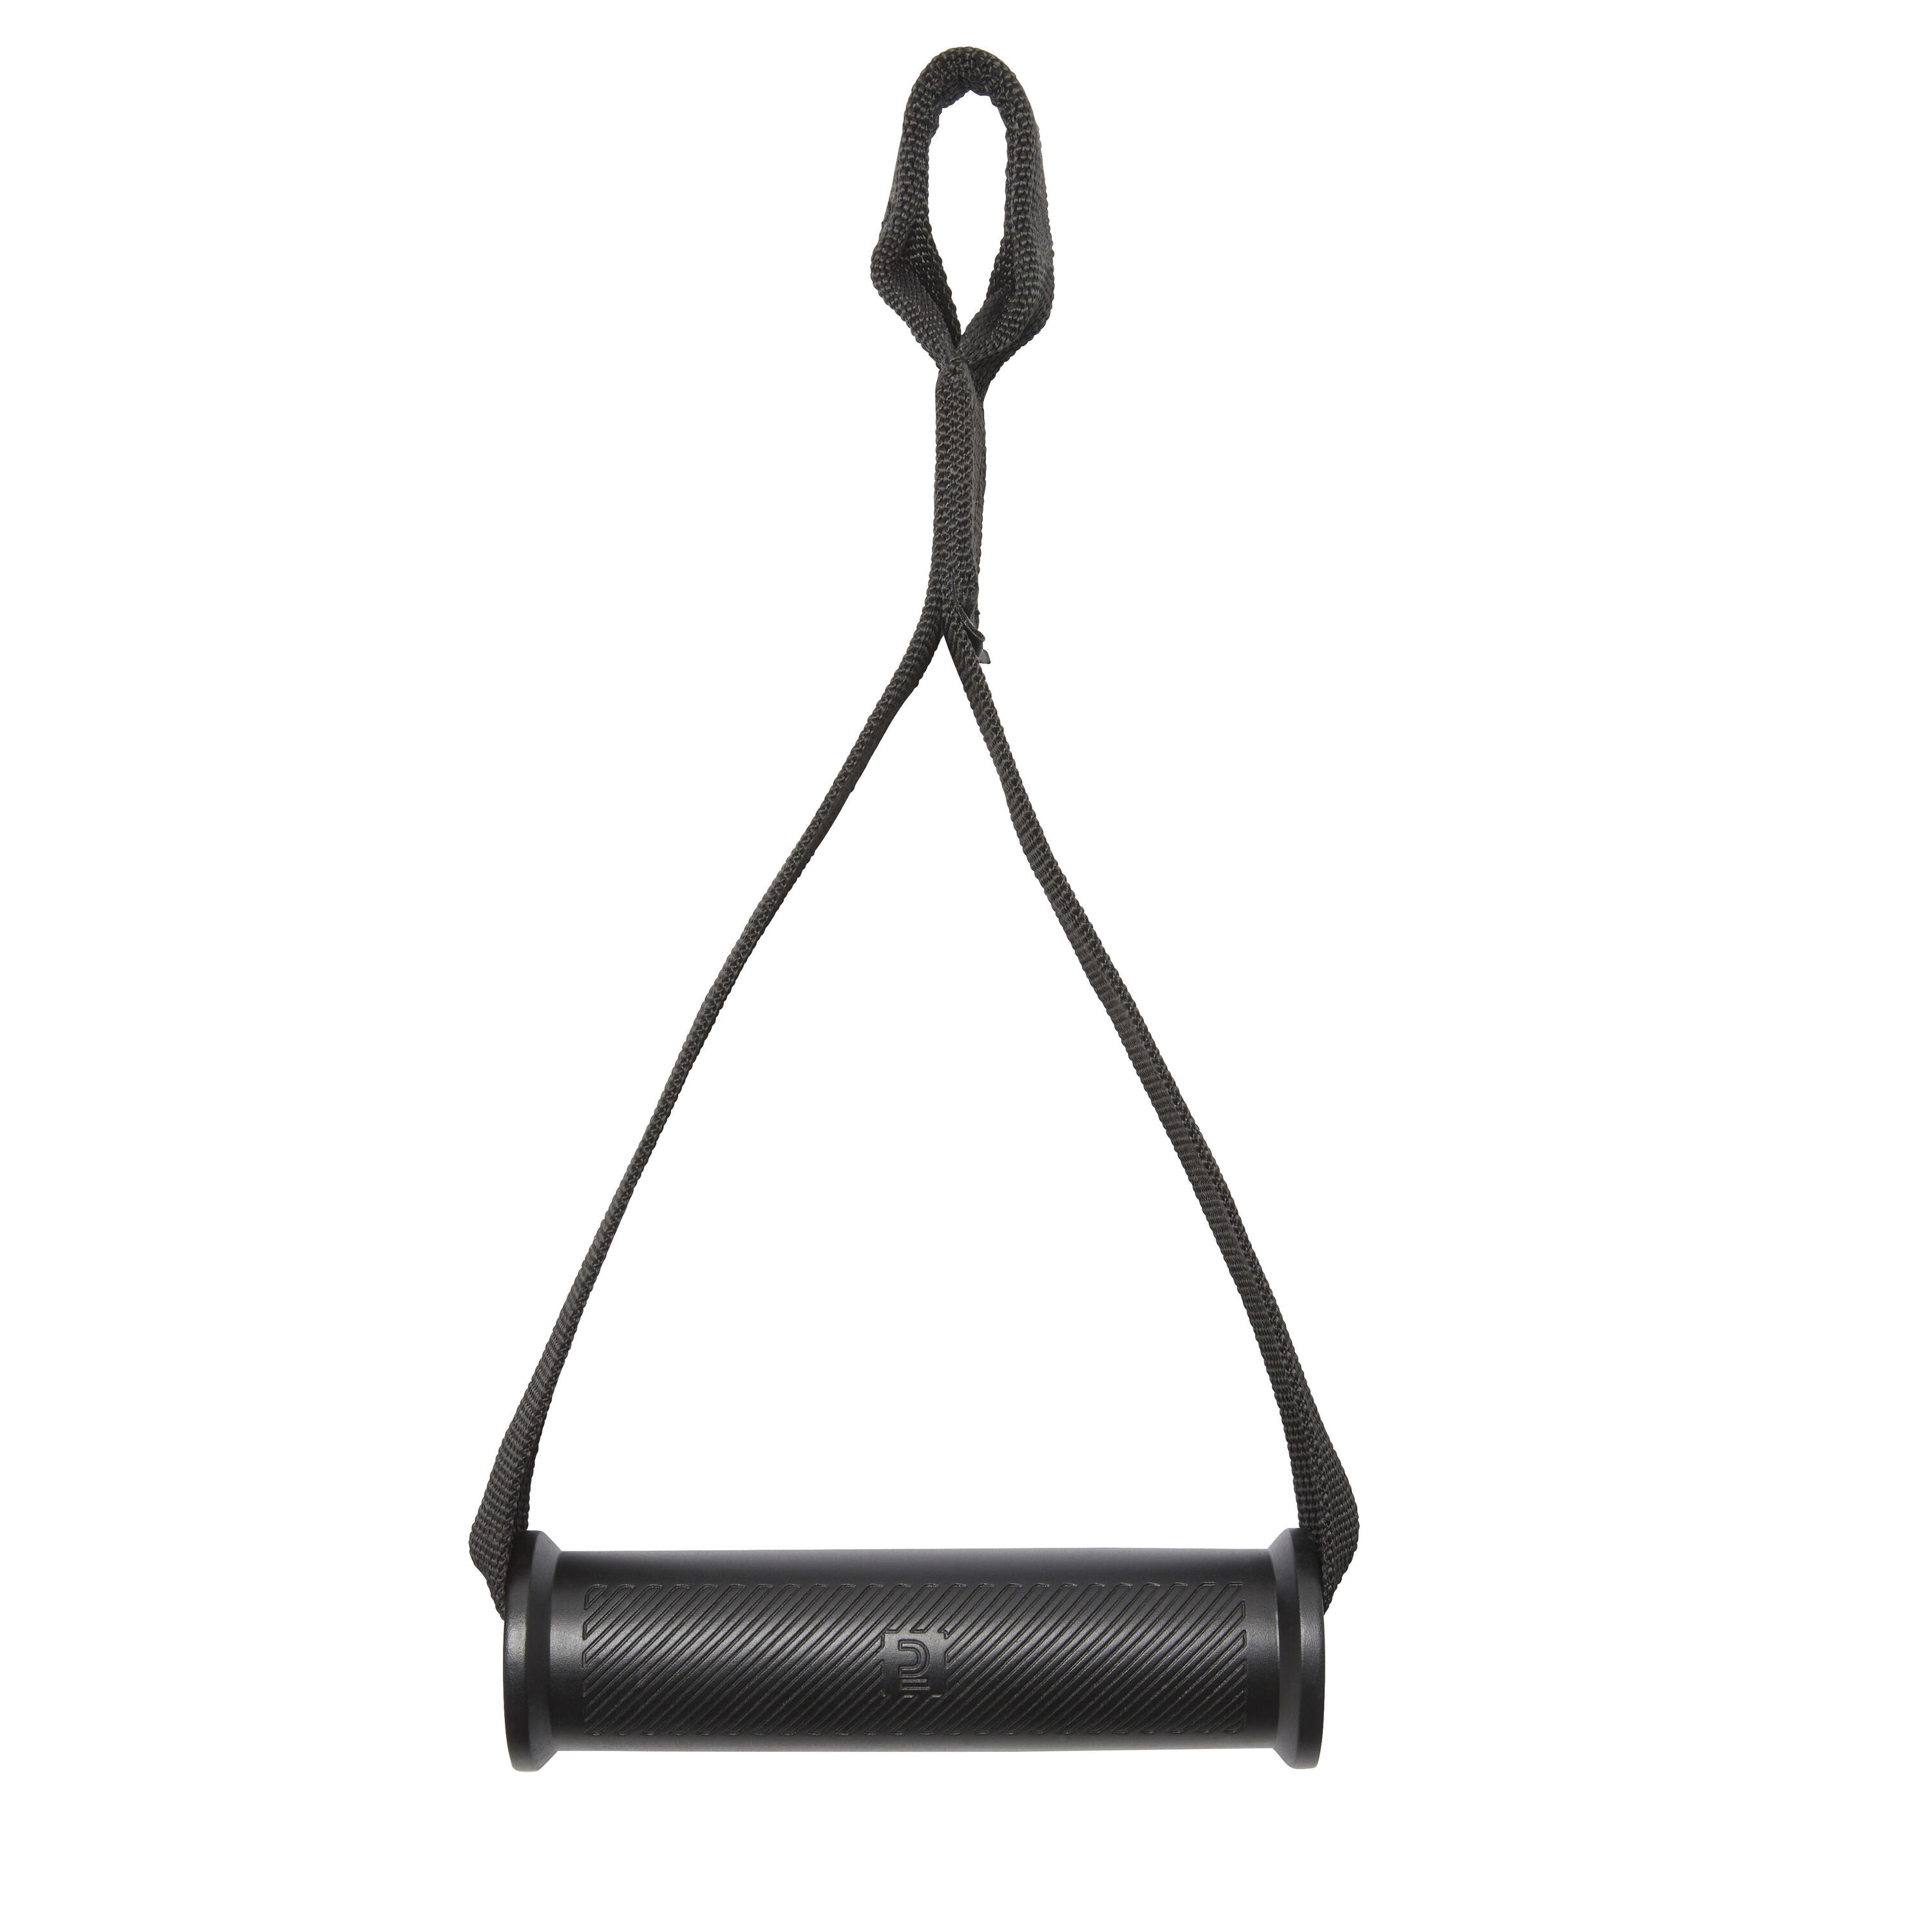 Weight Training Pulley Handle - Black 1/4